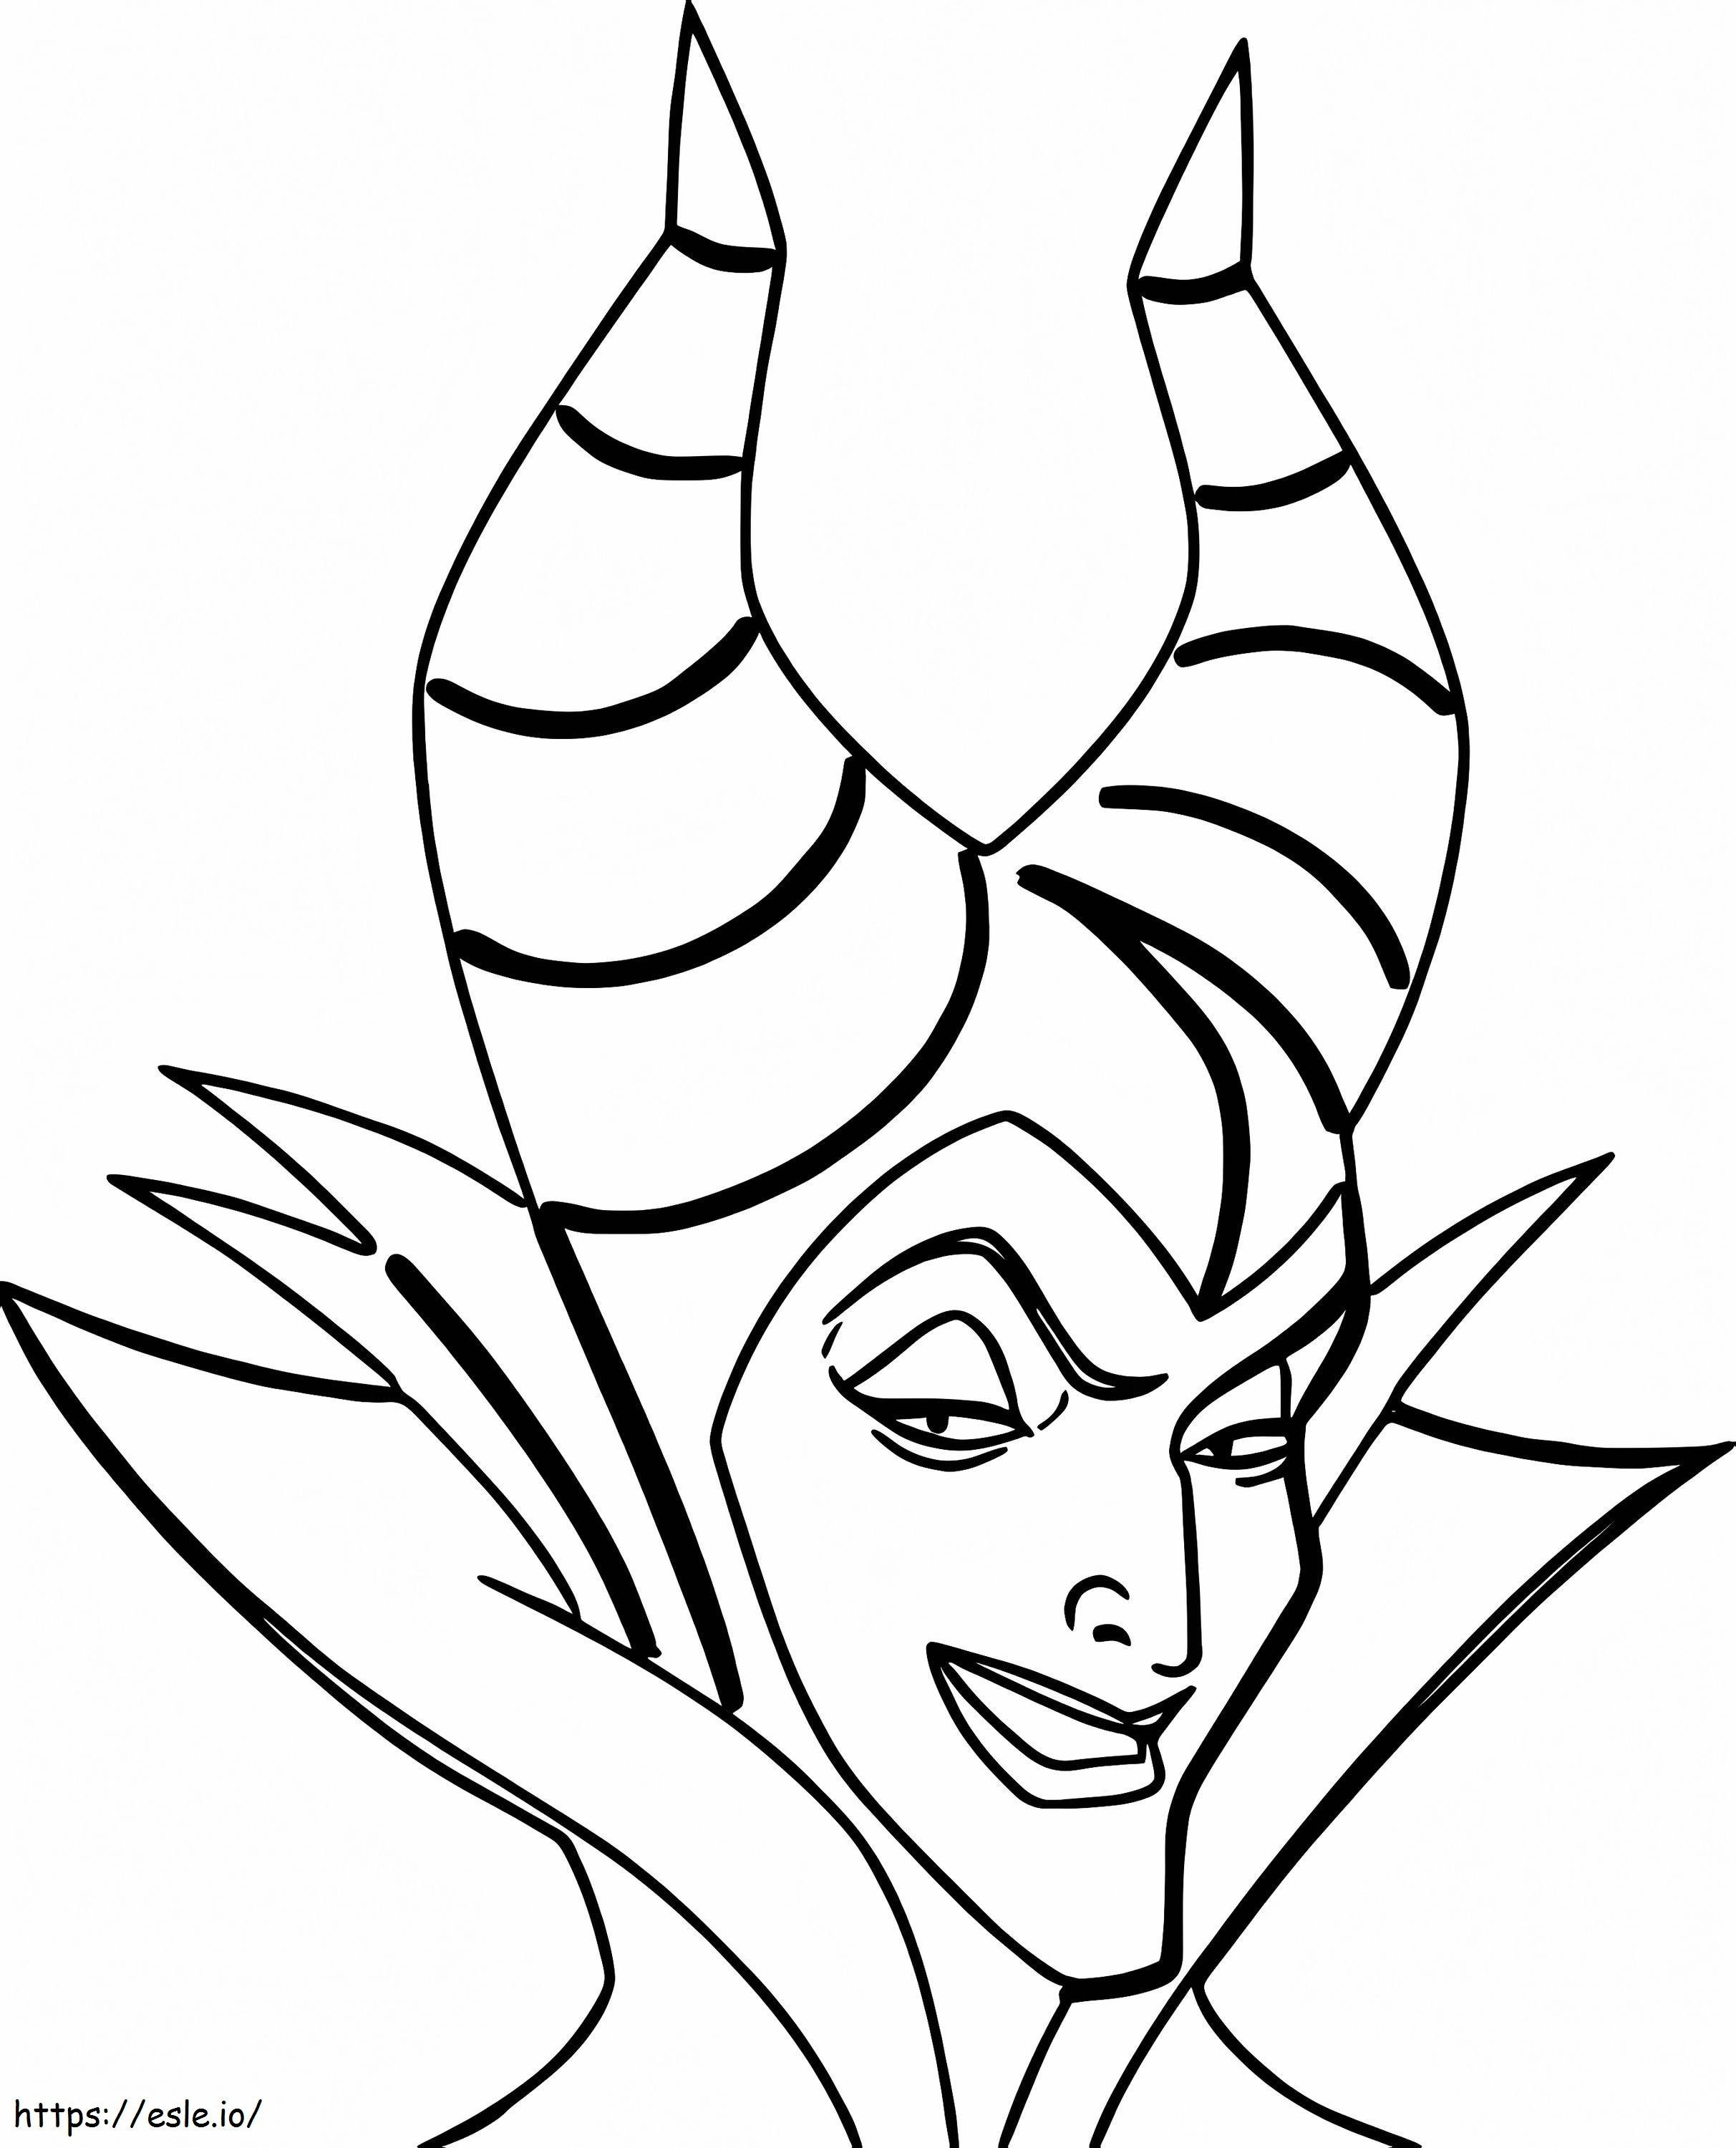 Evil Maleficent Smiling coloring page